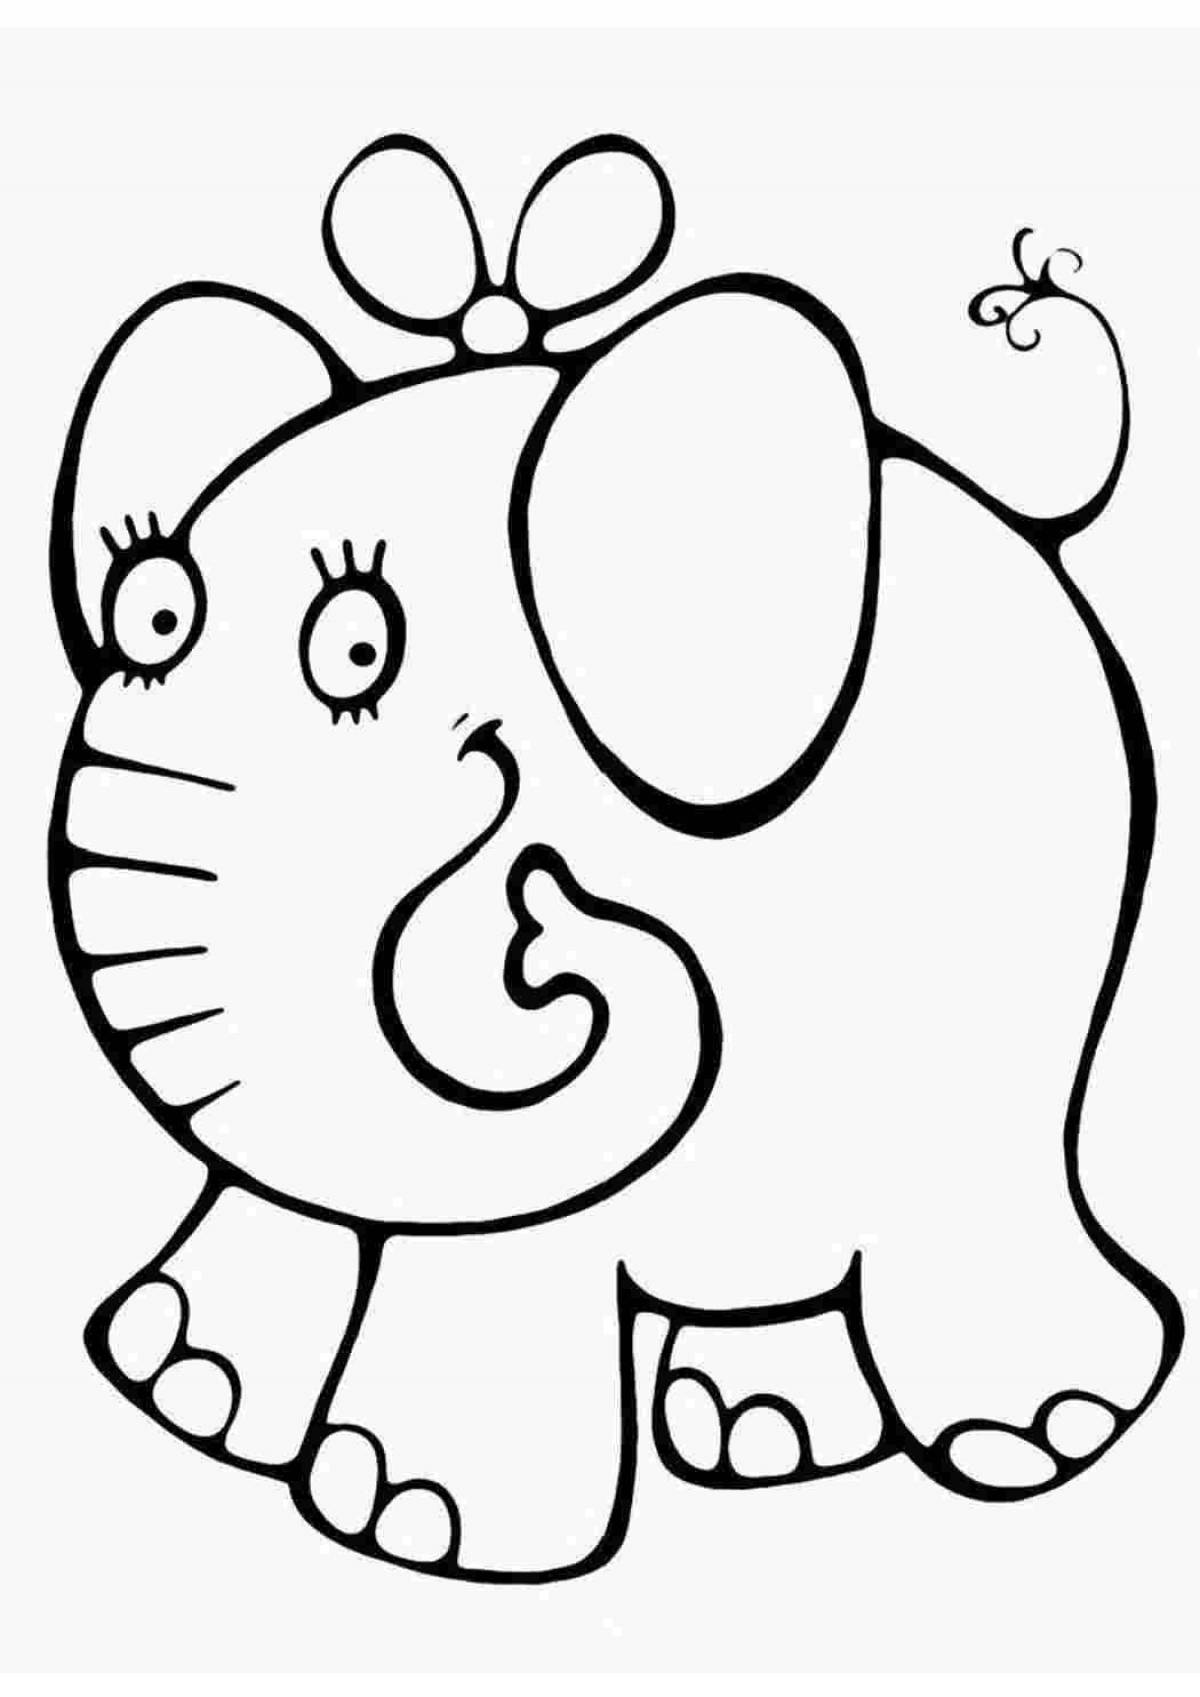 Colorful elephant coloring book for 3-4 year olds